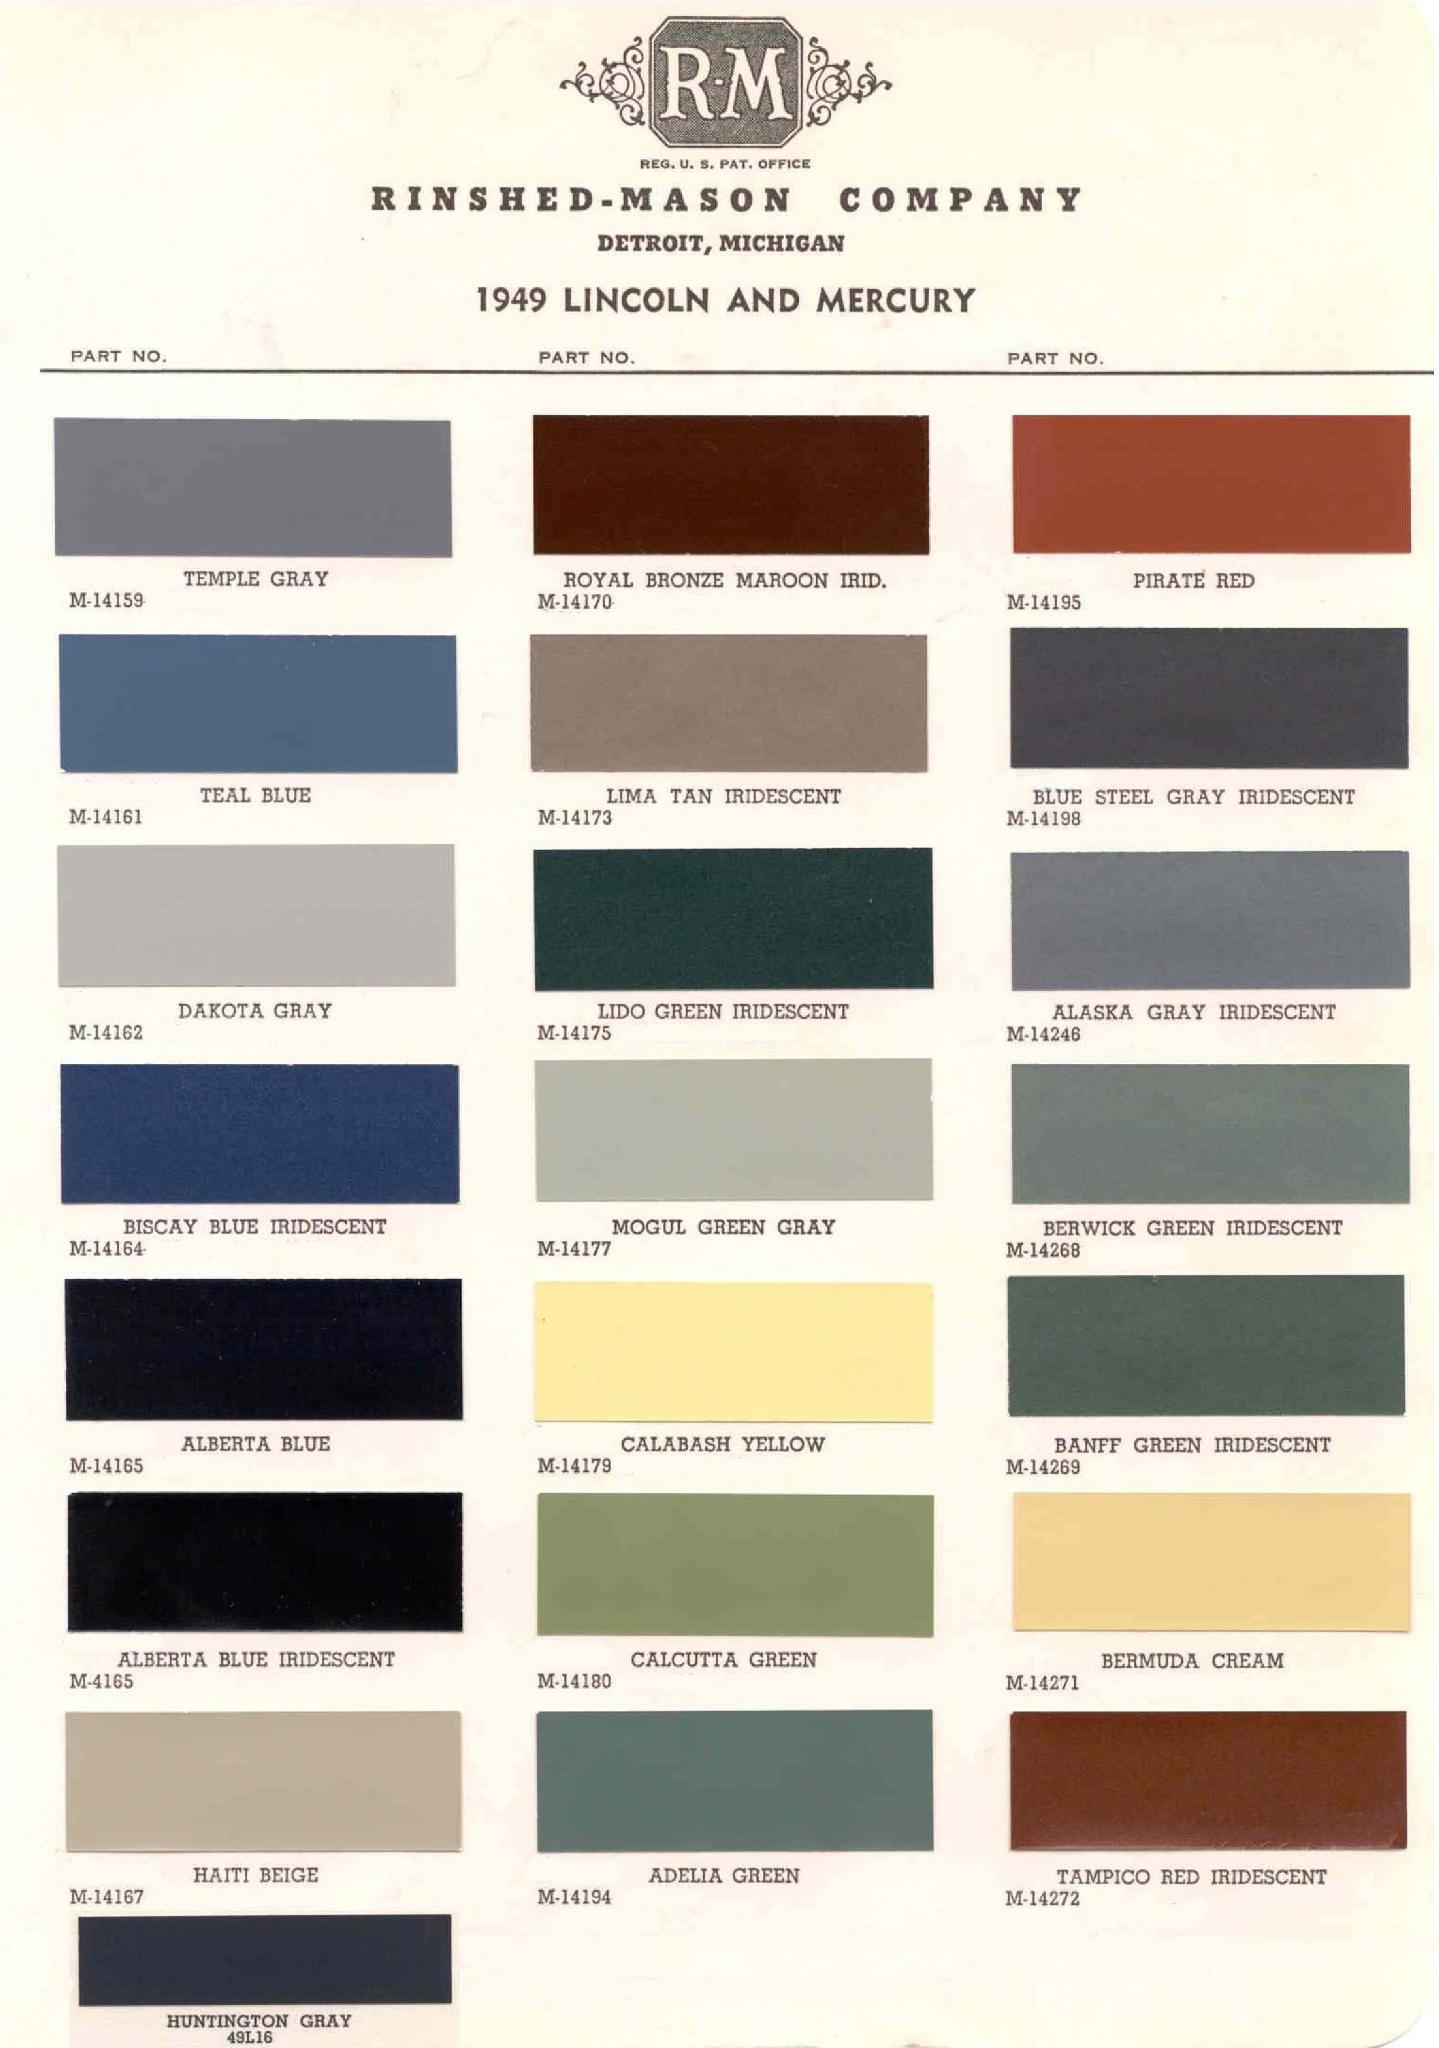 Paint Colors used on the Exterior of Lincoln